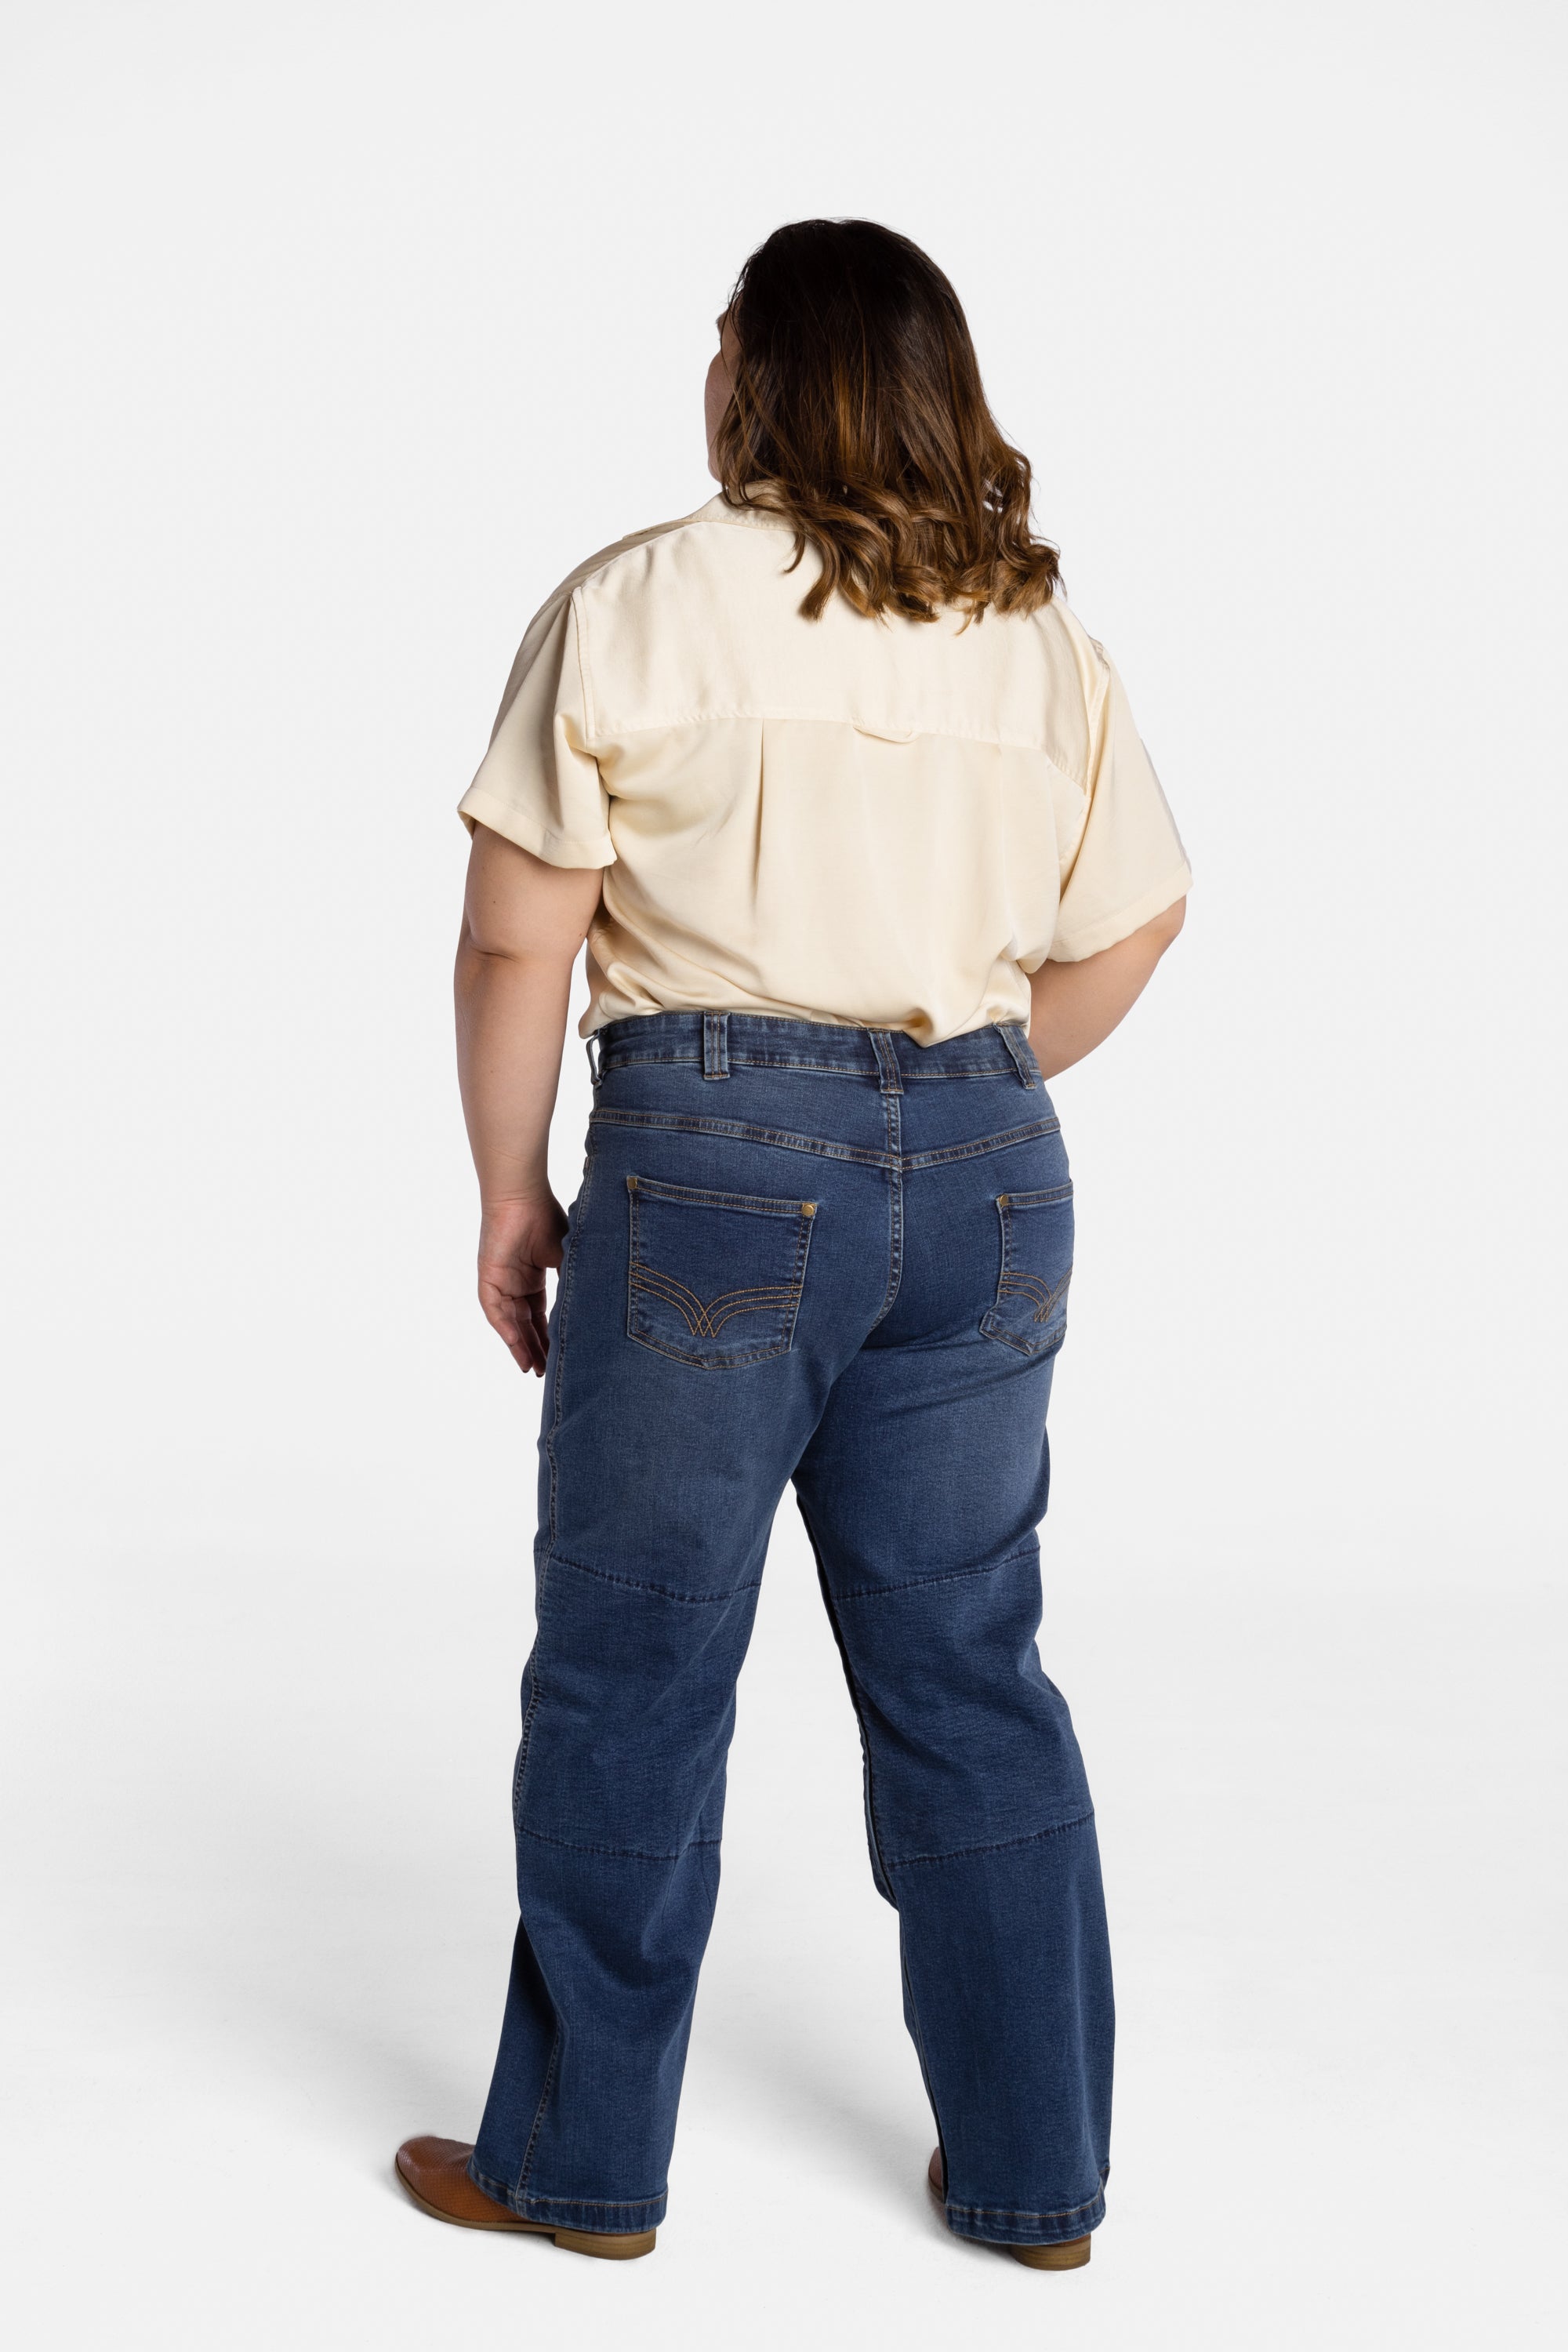 The back of Erica Cole, the founder of No Limbits, wearing the No Limbits Adaptive Women's Dark Wash Unlimbited Pants.